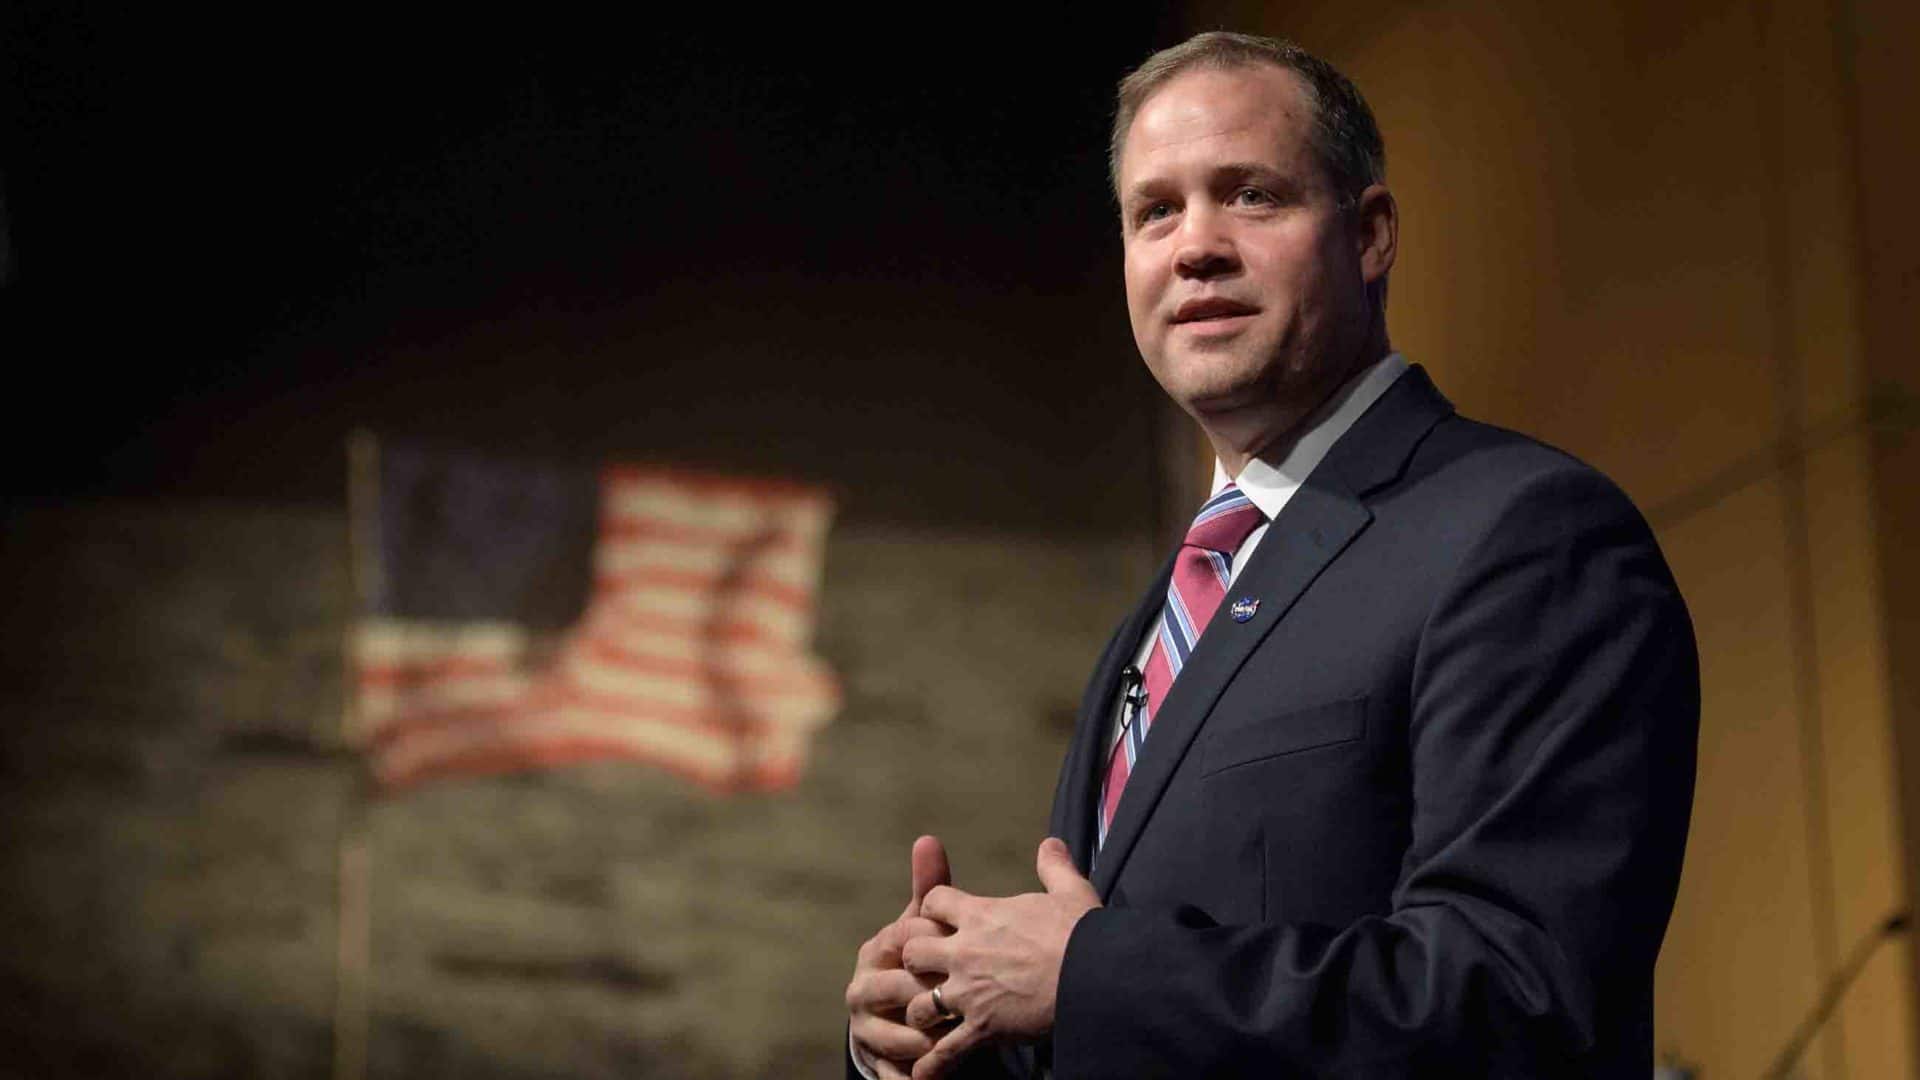 NASA Administrator Jim Bridenstine is working to achieve President Trump's goal of returning humans to the moon by 2024.